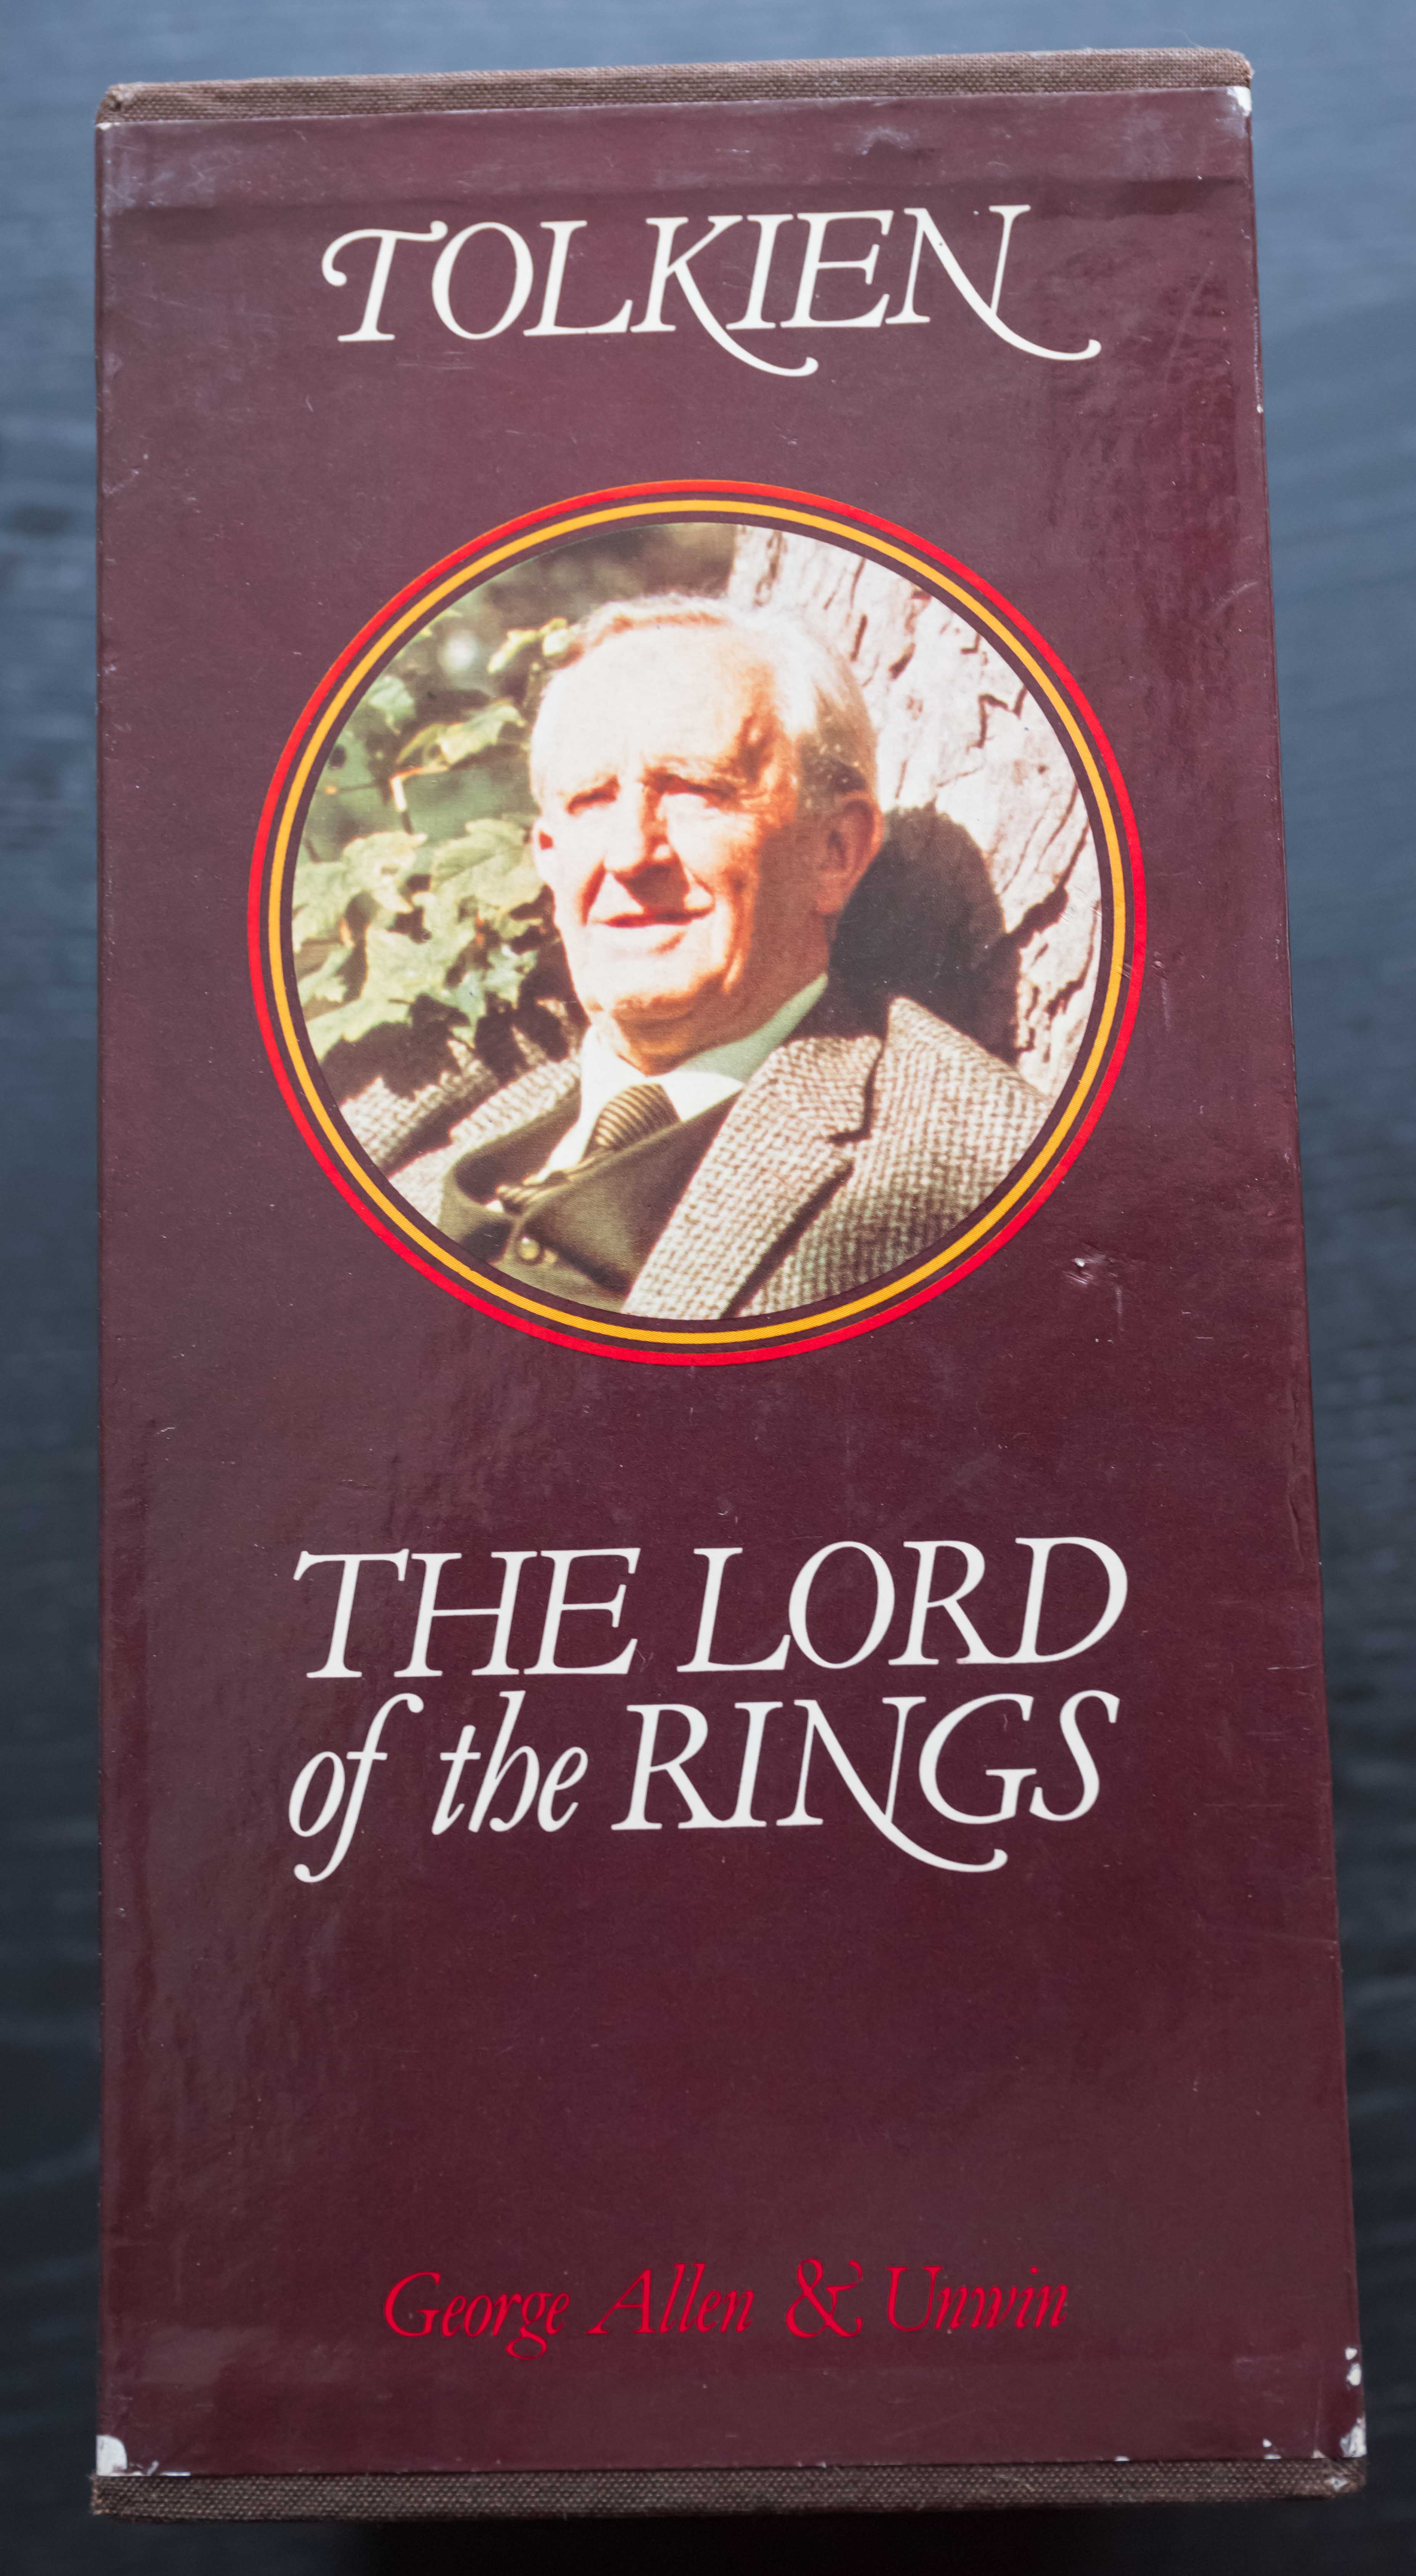 The Lord of the Rings, 2nd UK Edition, 10 / 10 / 9 set in original slipcase 3